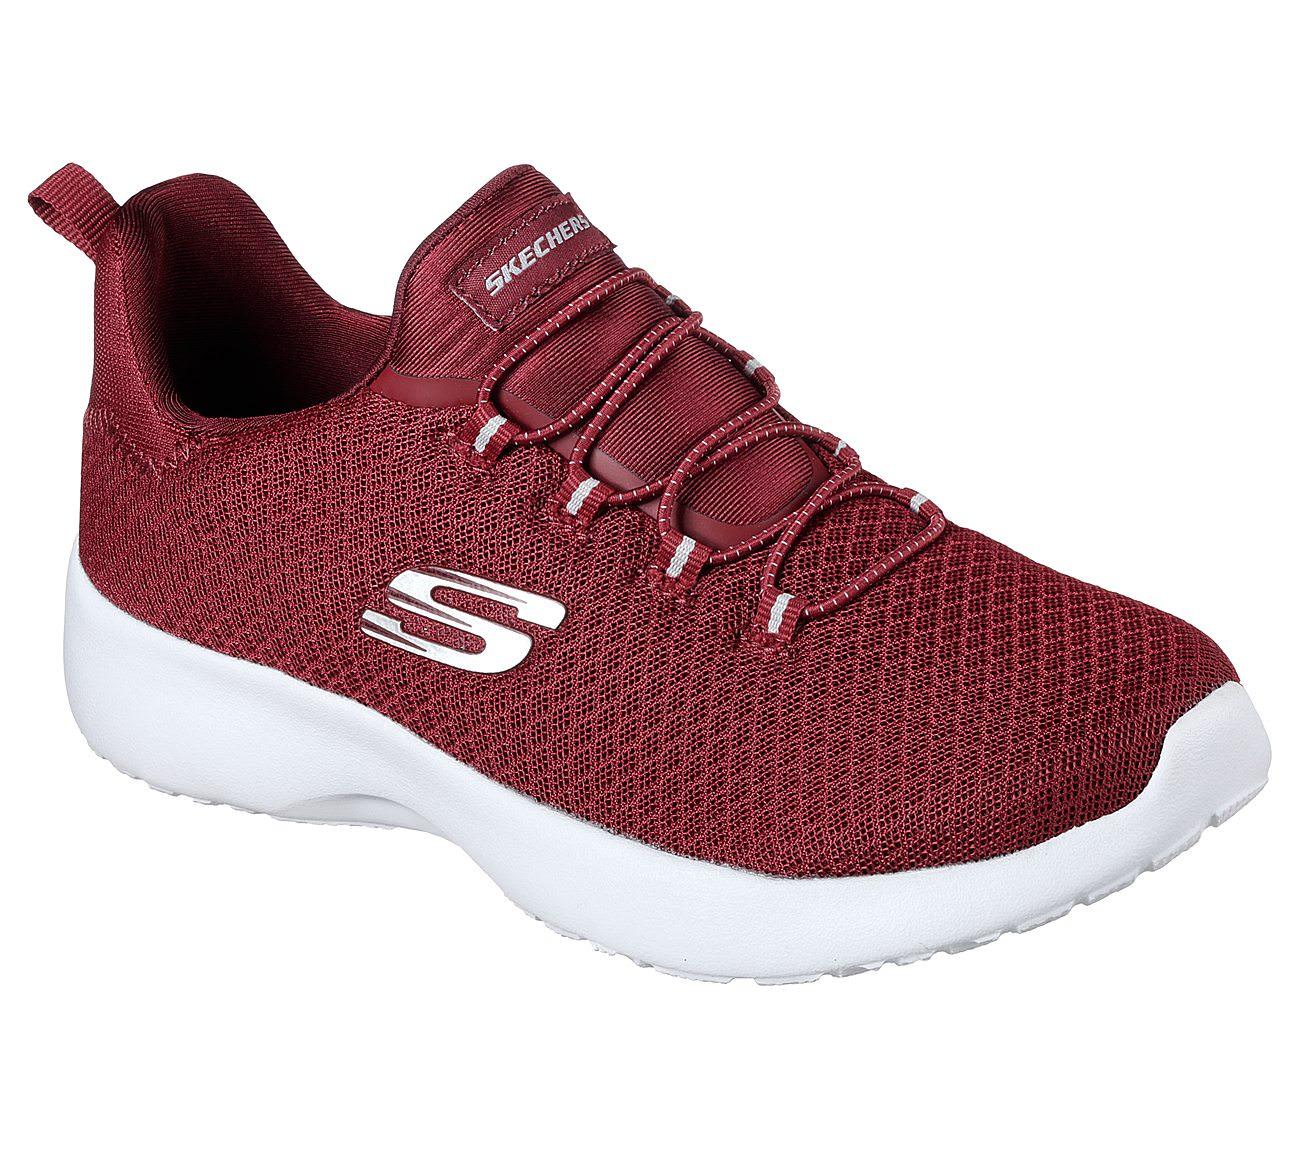 skechers rubber shoes price